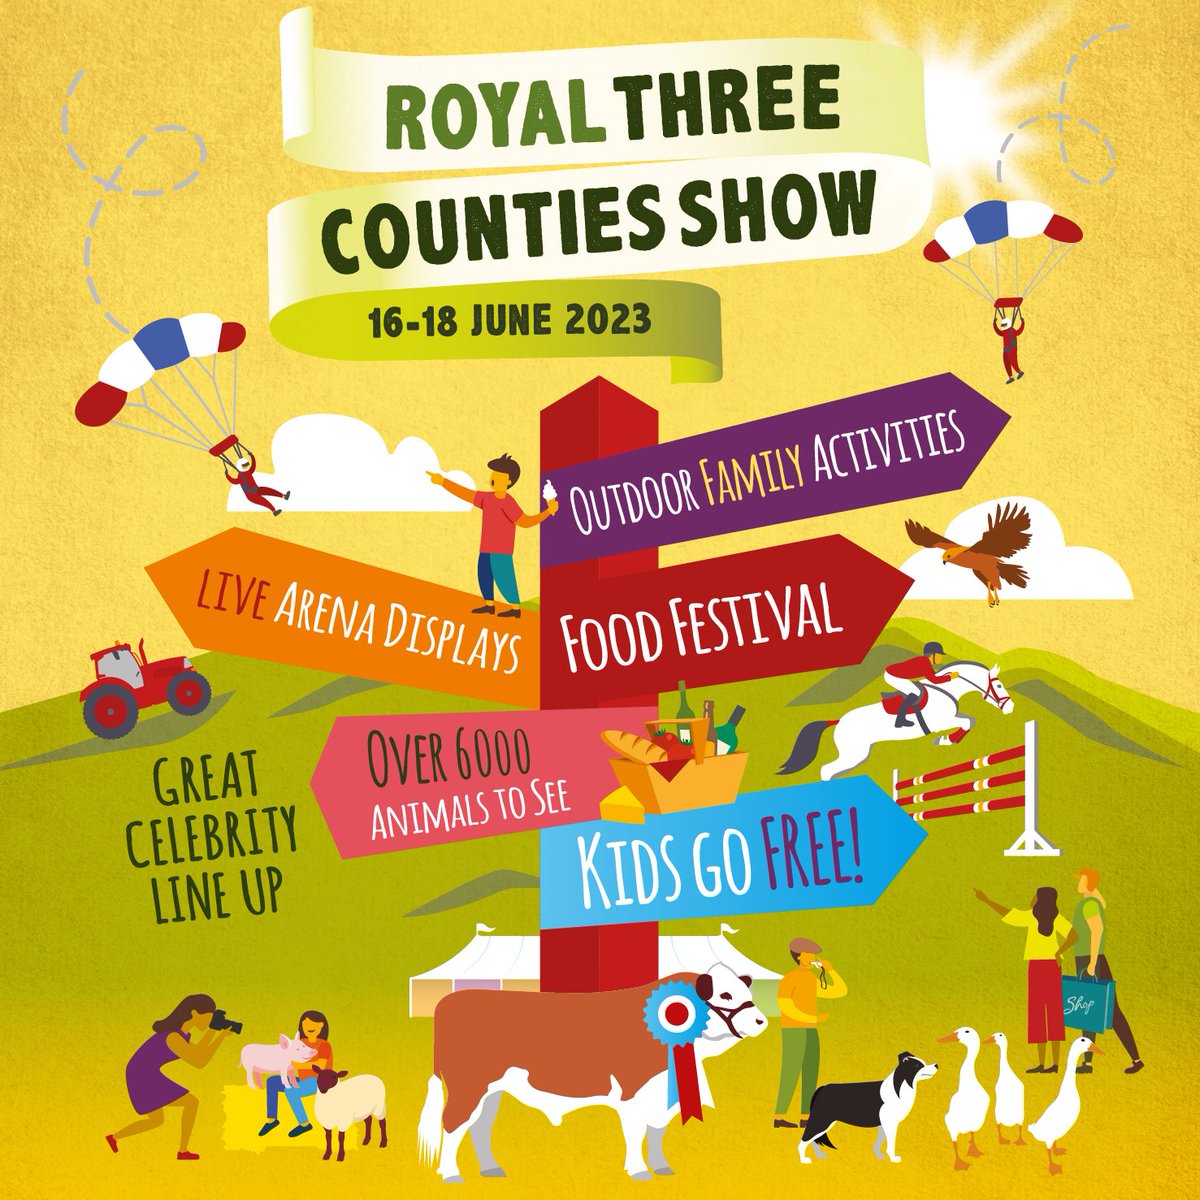 Excited to let you all know I will be @3countiesshows this Sunday! With a packed out schedule - can’t wait to see you all there 🙌🏾 #RoyalThreeCountiesShow